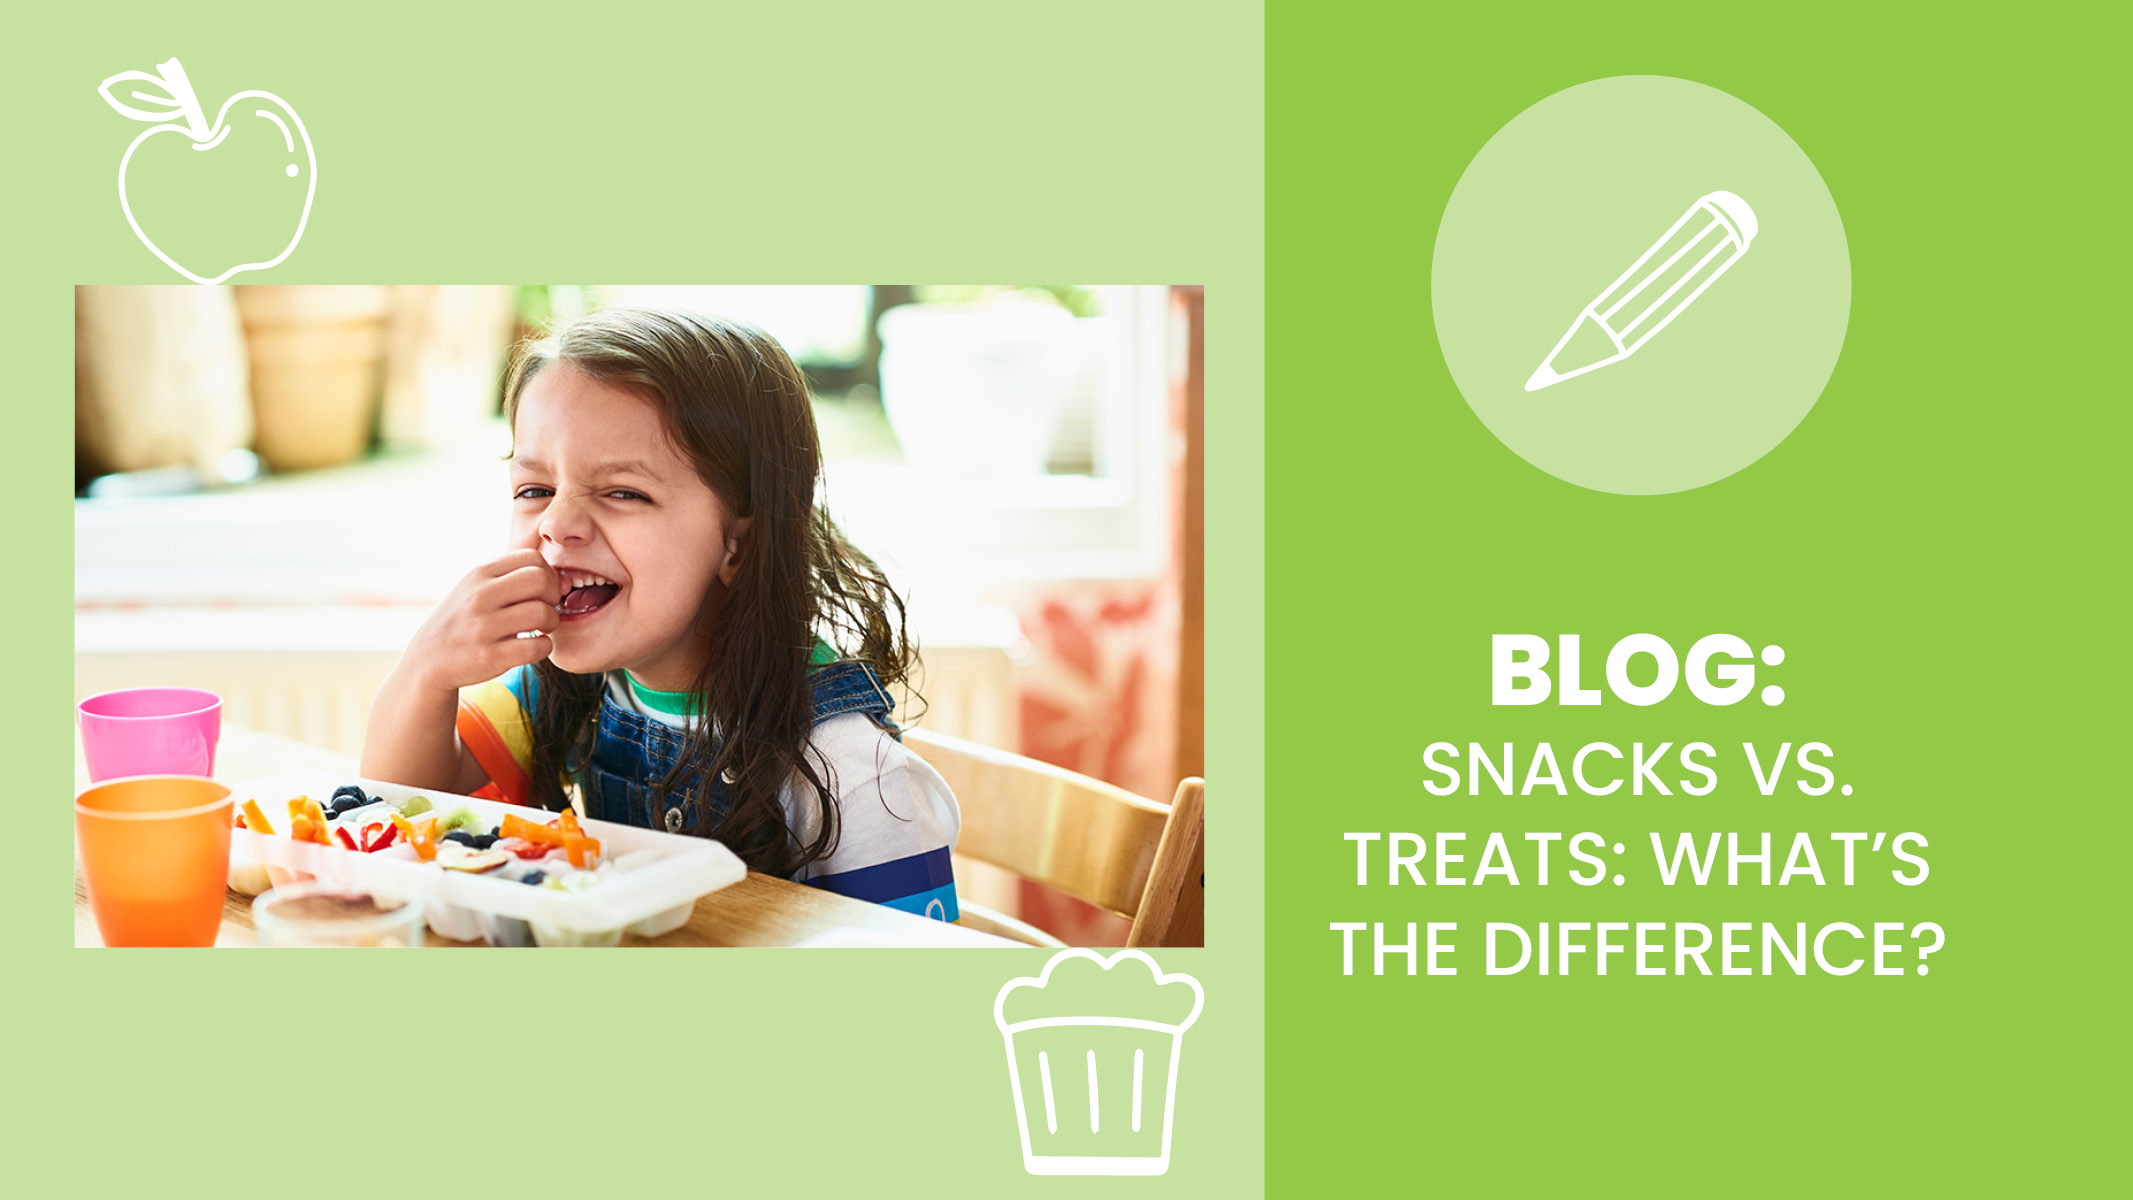 Young child snacks on healthy food